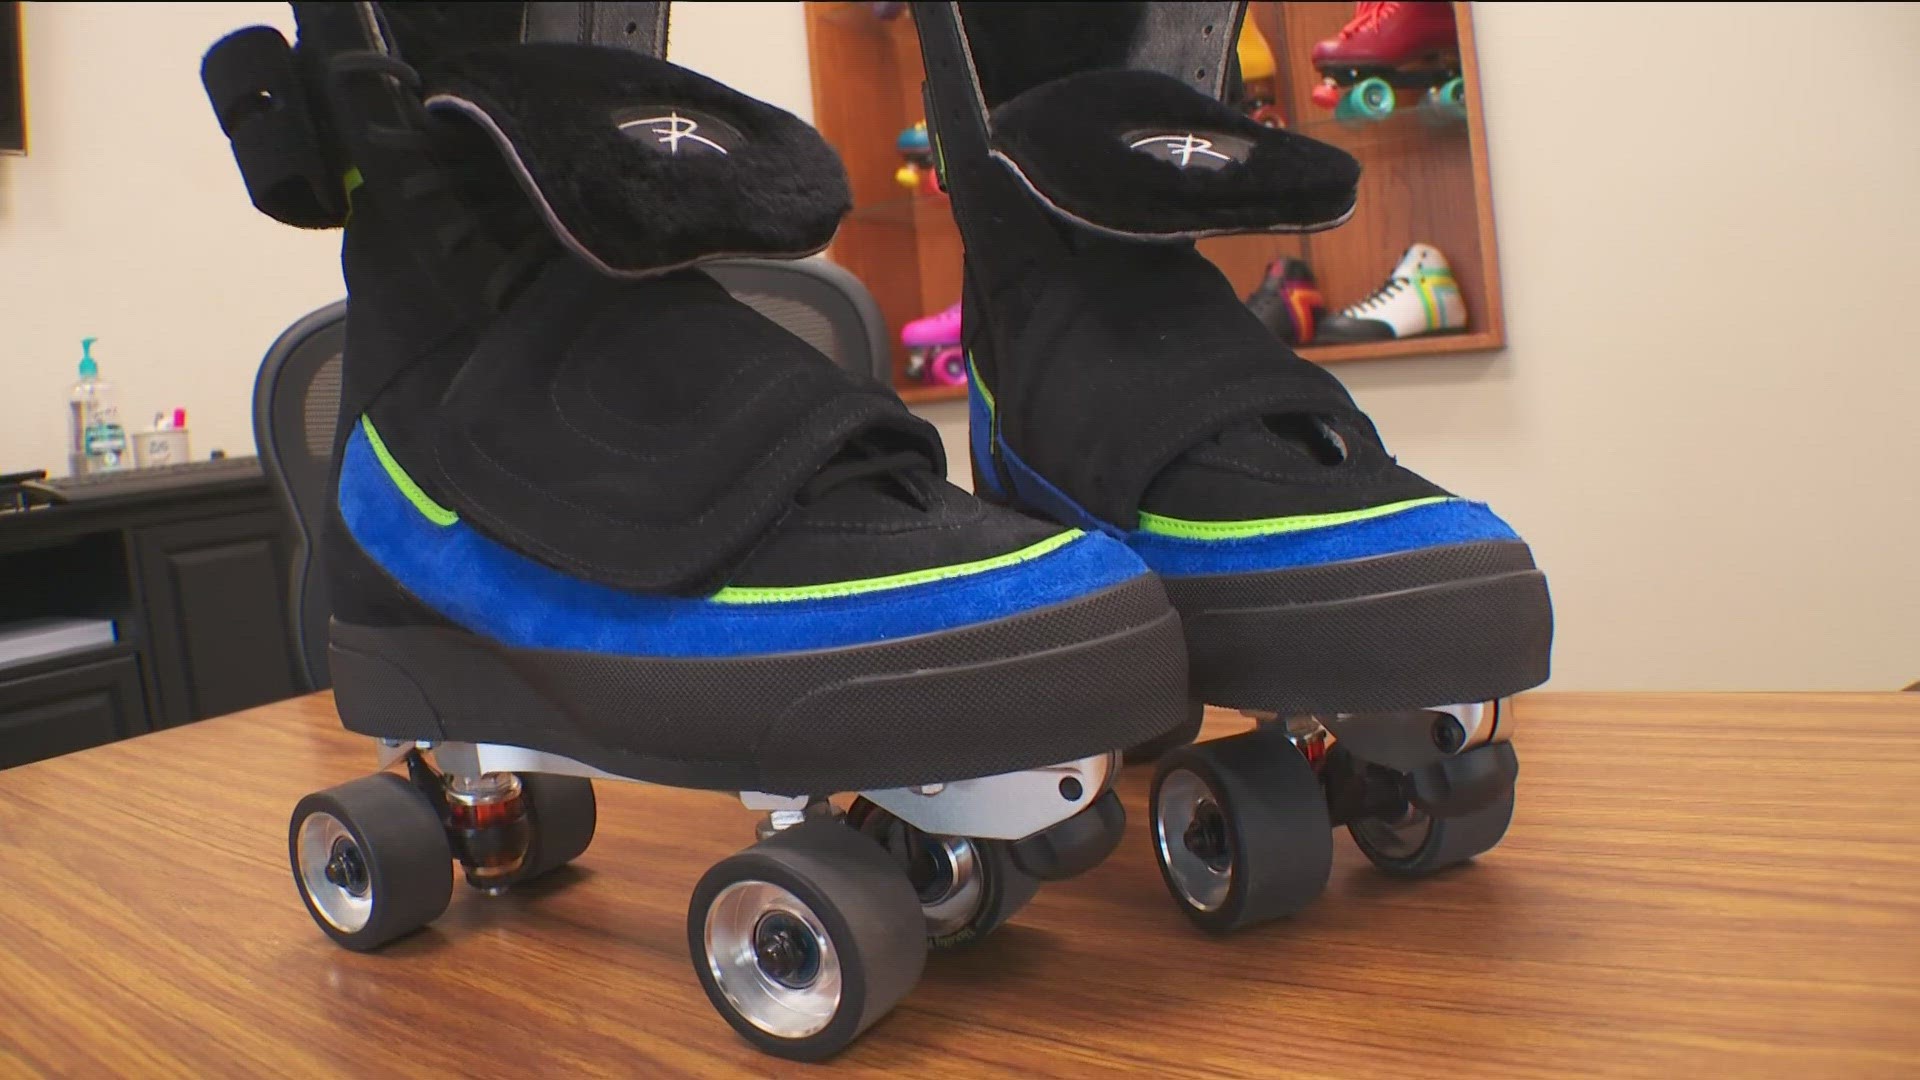 The roller skates were created by a fourth-generation, family-owned company in Red Wing.